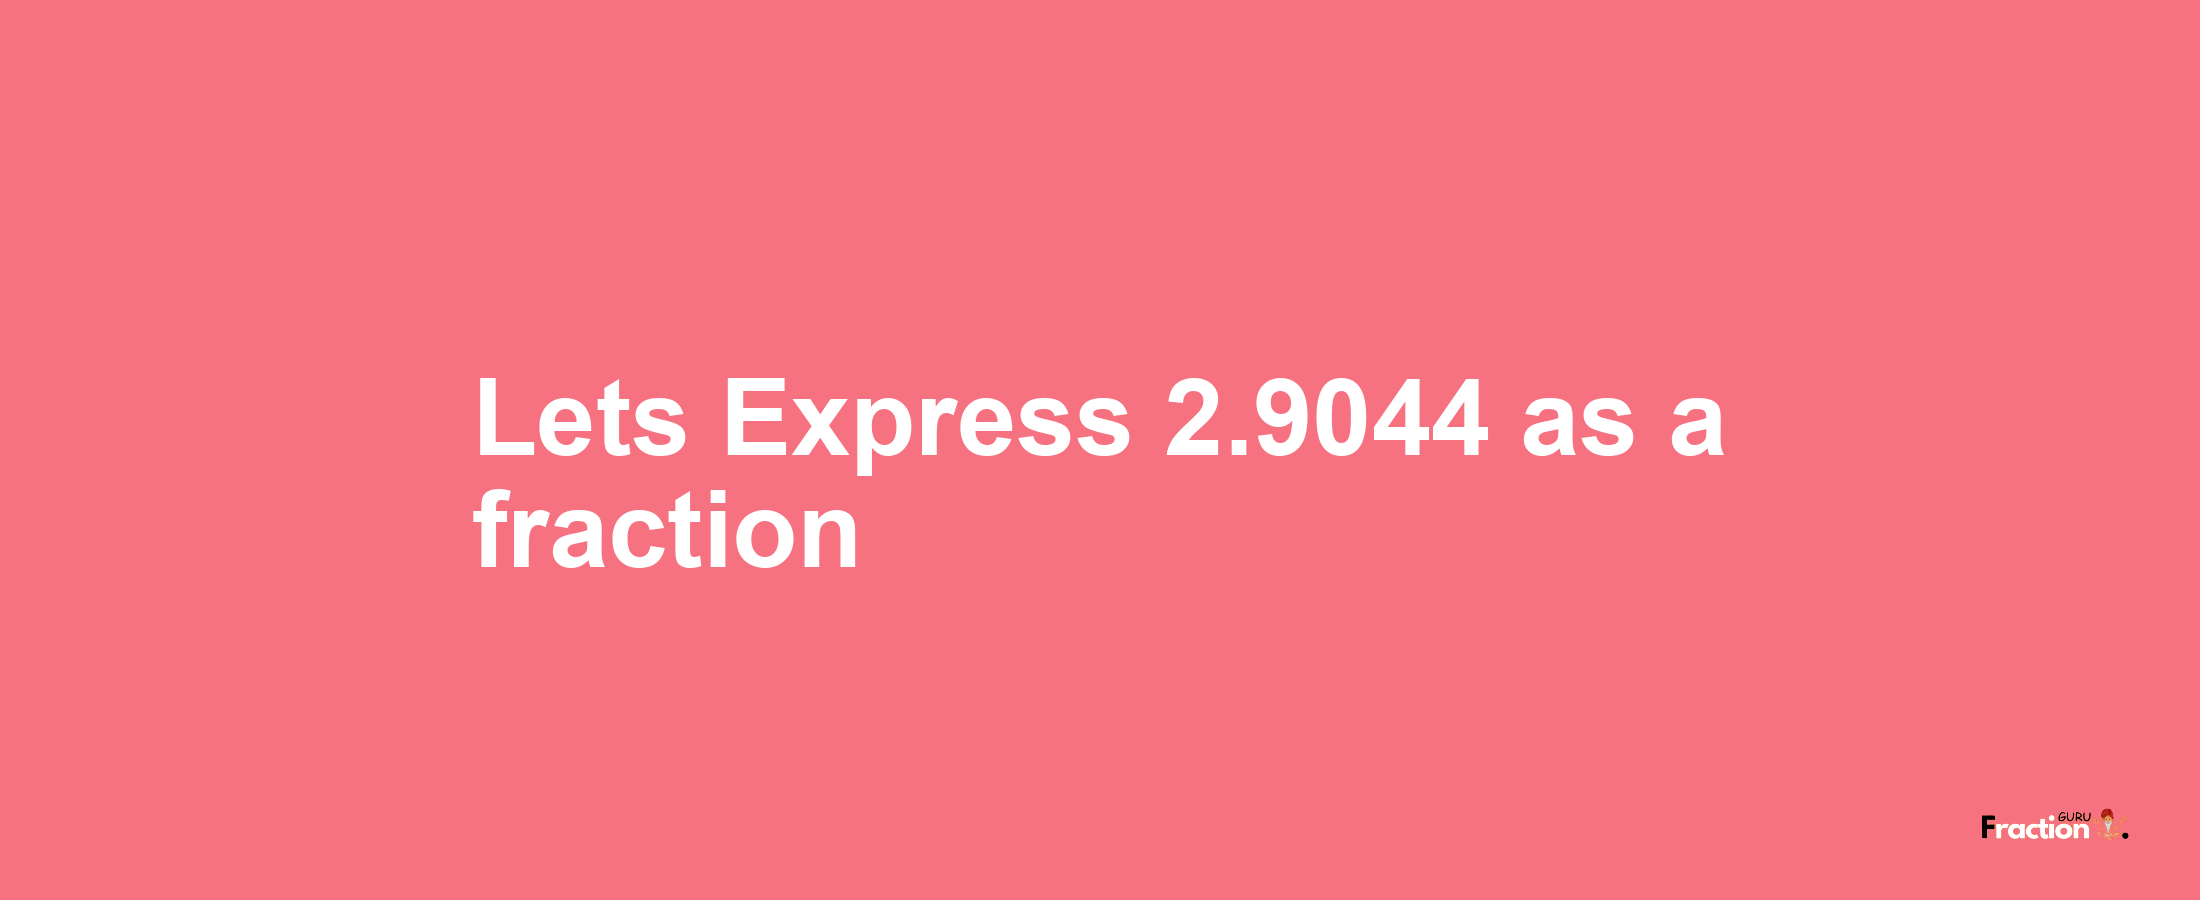 Lets Express 2.9044 as afraction